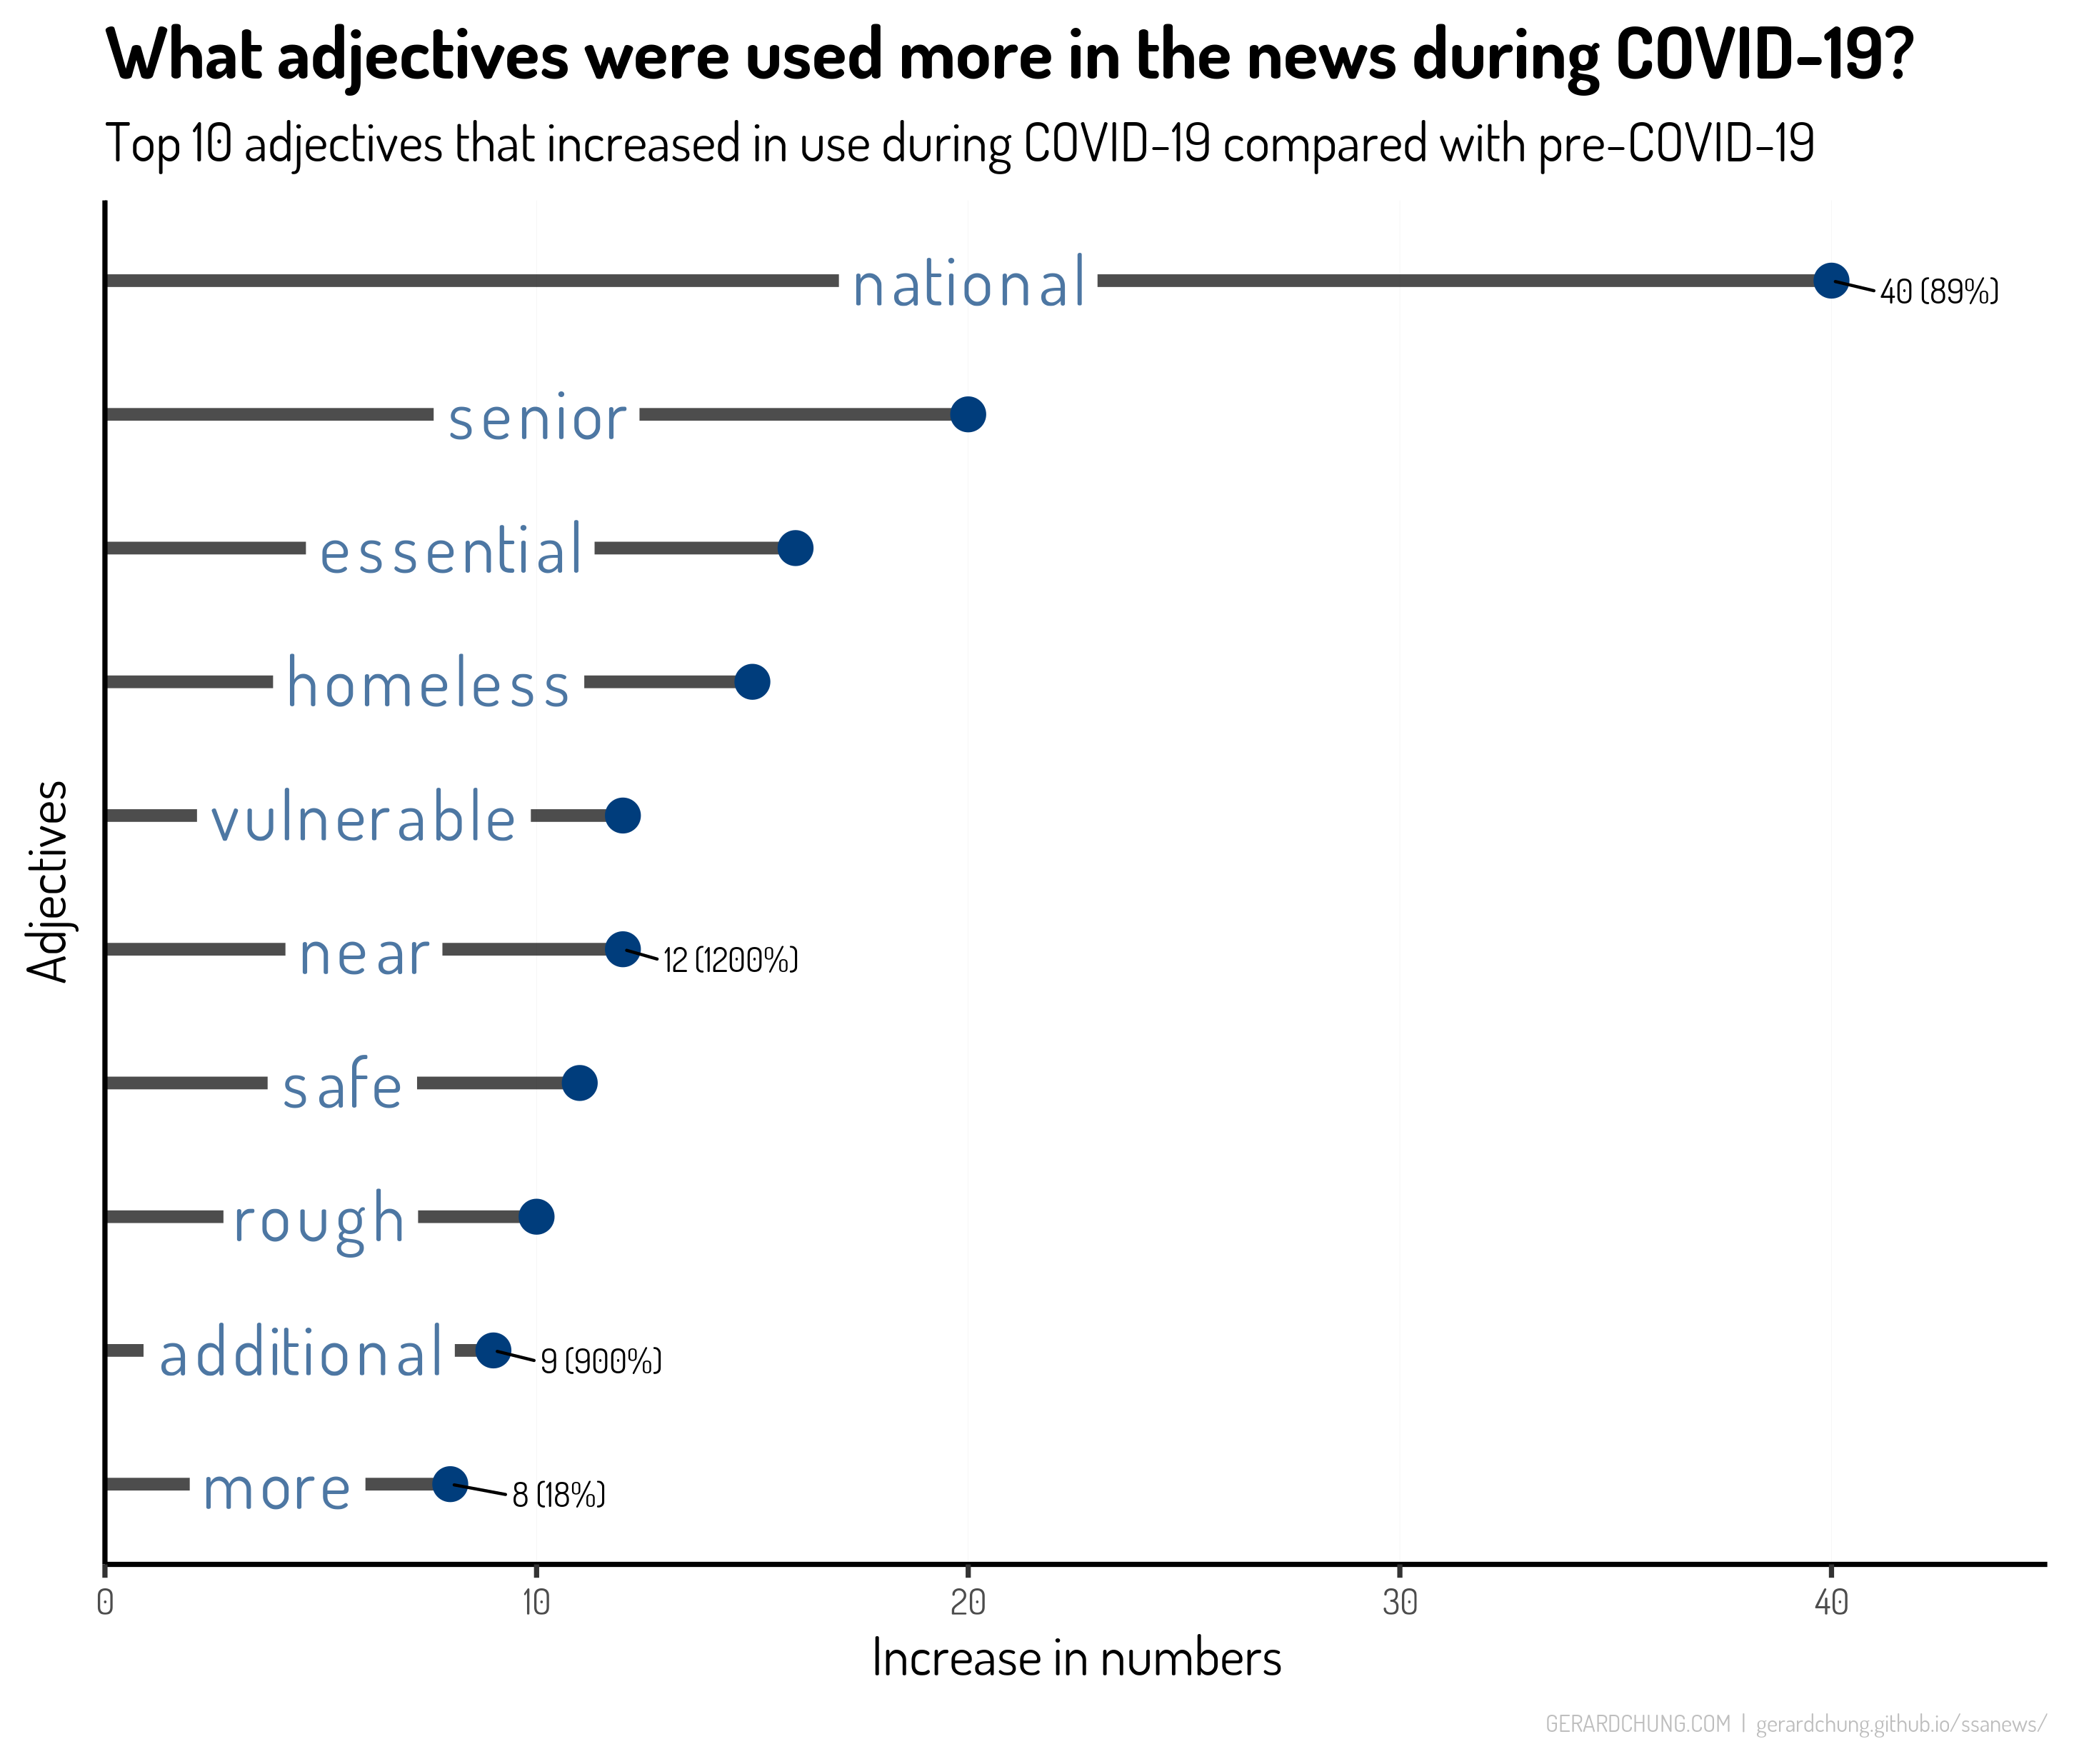 Figure 4 - Adjectives used more during pandemic